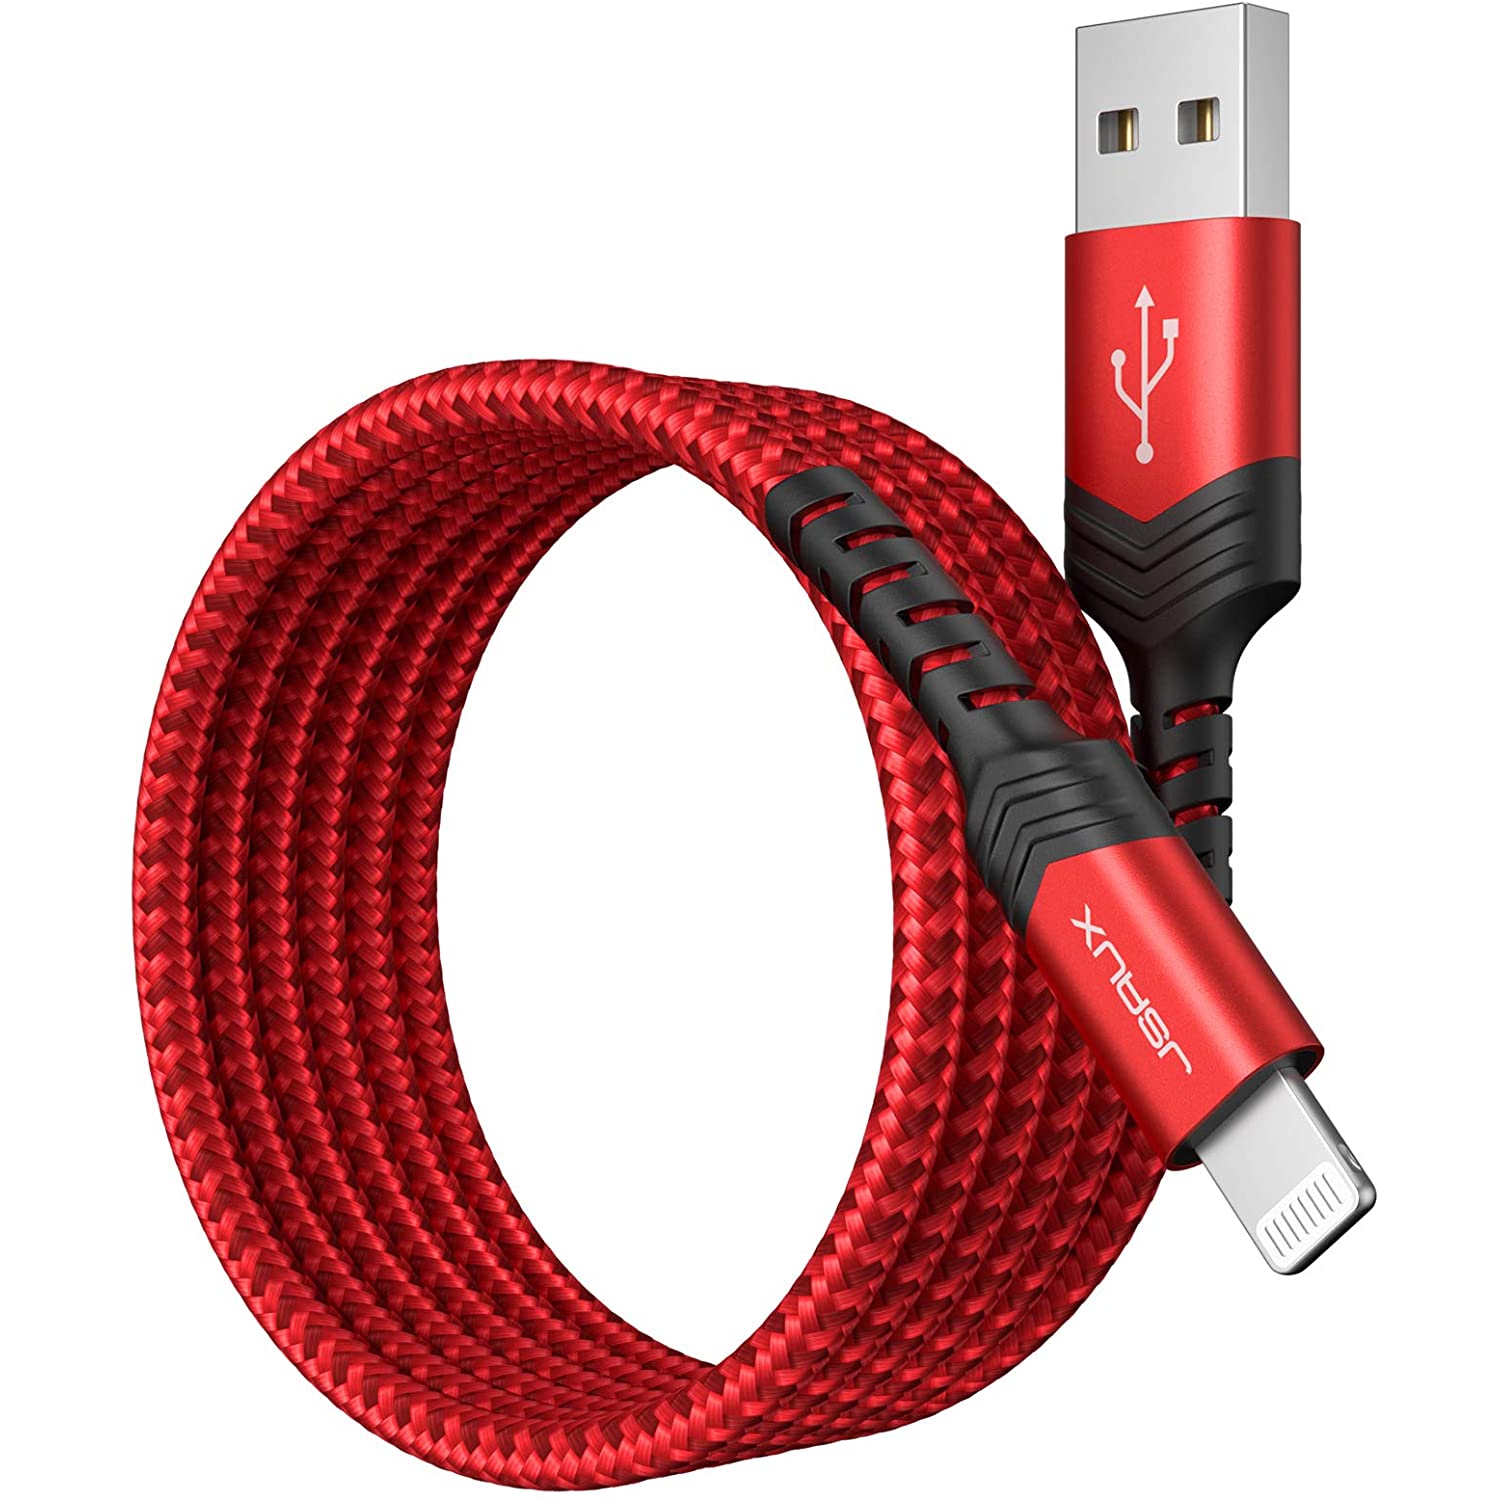 iPhone Lightning Charger Cable [6ft/1.8m], JSAUX [Apple MFi Certified] Lightning to USB A Nylon Braided Fast Charging Cord Compatible with iPhone 11 Max X Xs XR 8 7 6s 6 Plus SE 5 5s, iPad -Red